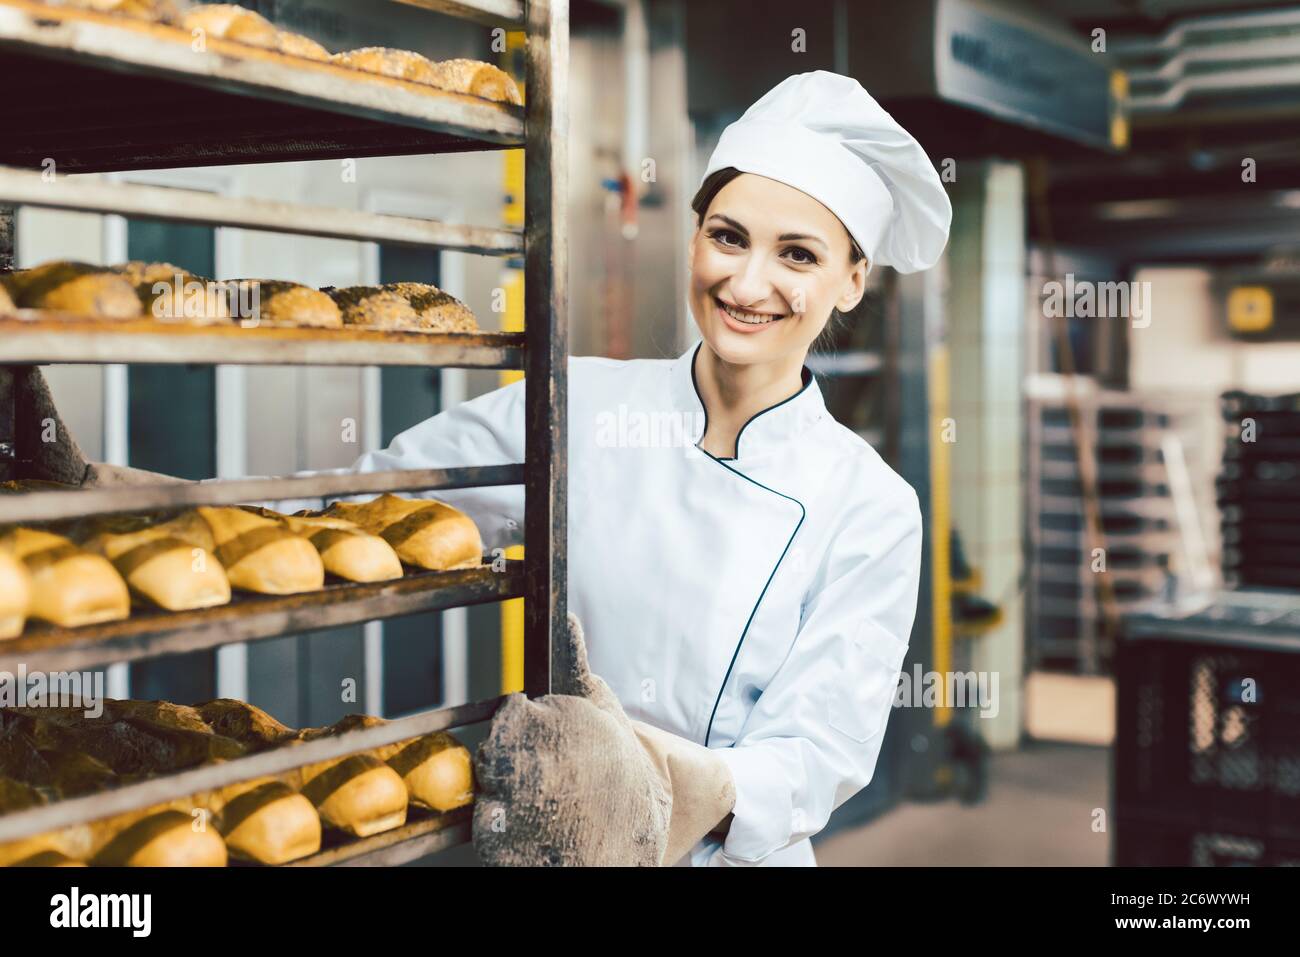 https://c8.alamy.com/comp/2C6WYWH/baker-woman-pushing-sheets-with-bread-in-the-baking-oven-2C6WYWH.jpg